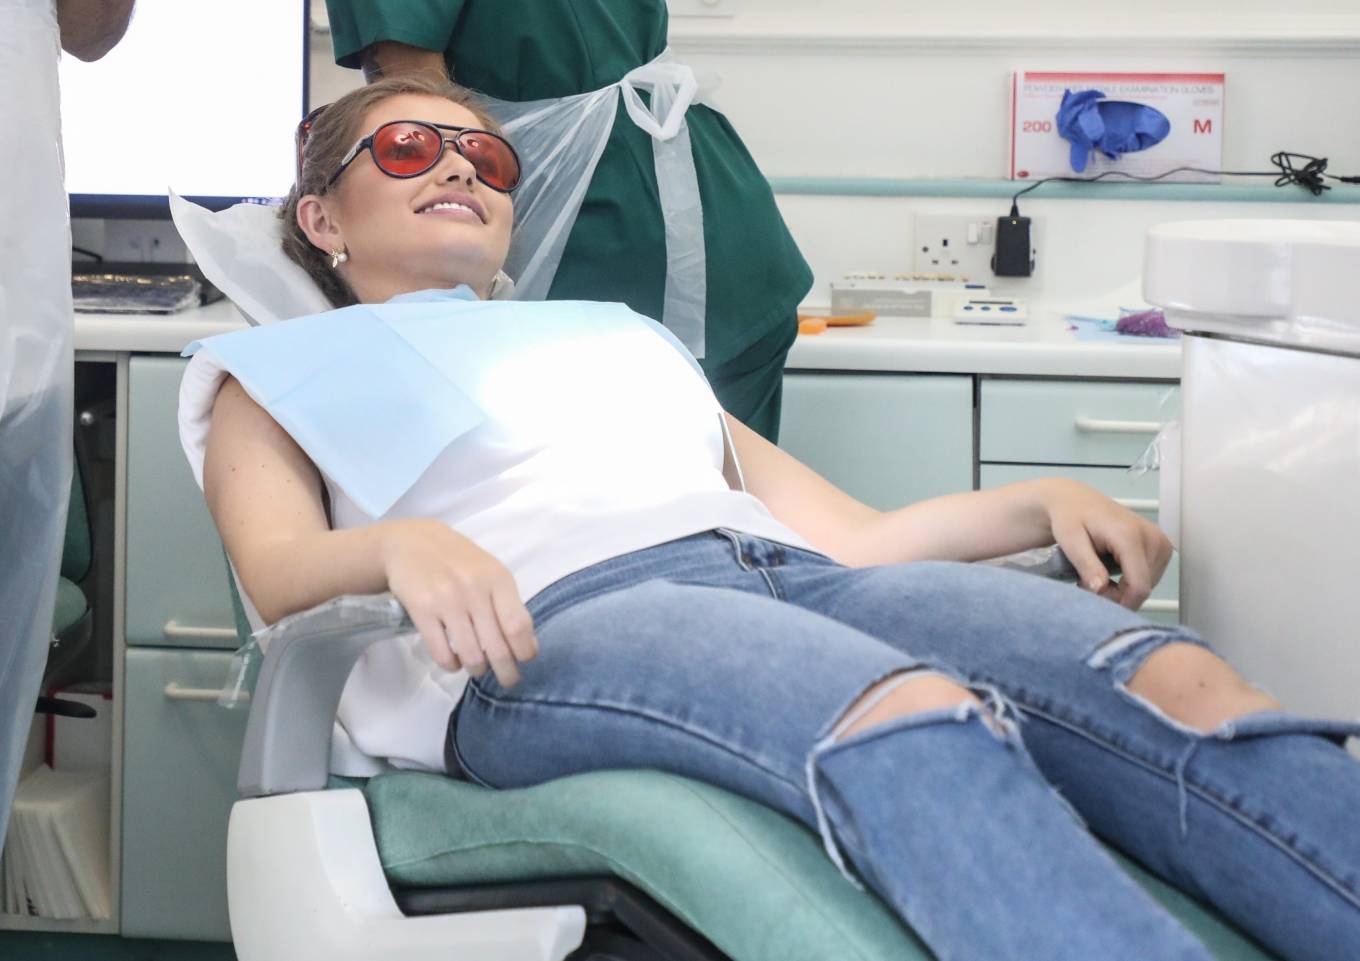 Amy Hart – Visiting celebrity dentist Dr Richard Marques in London